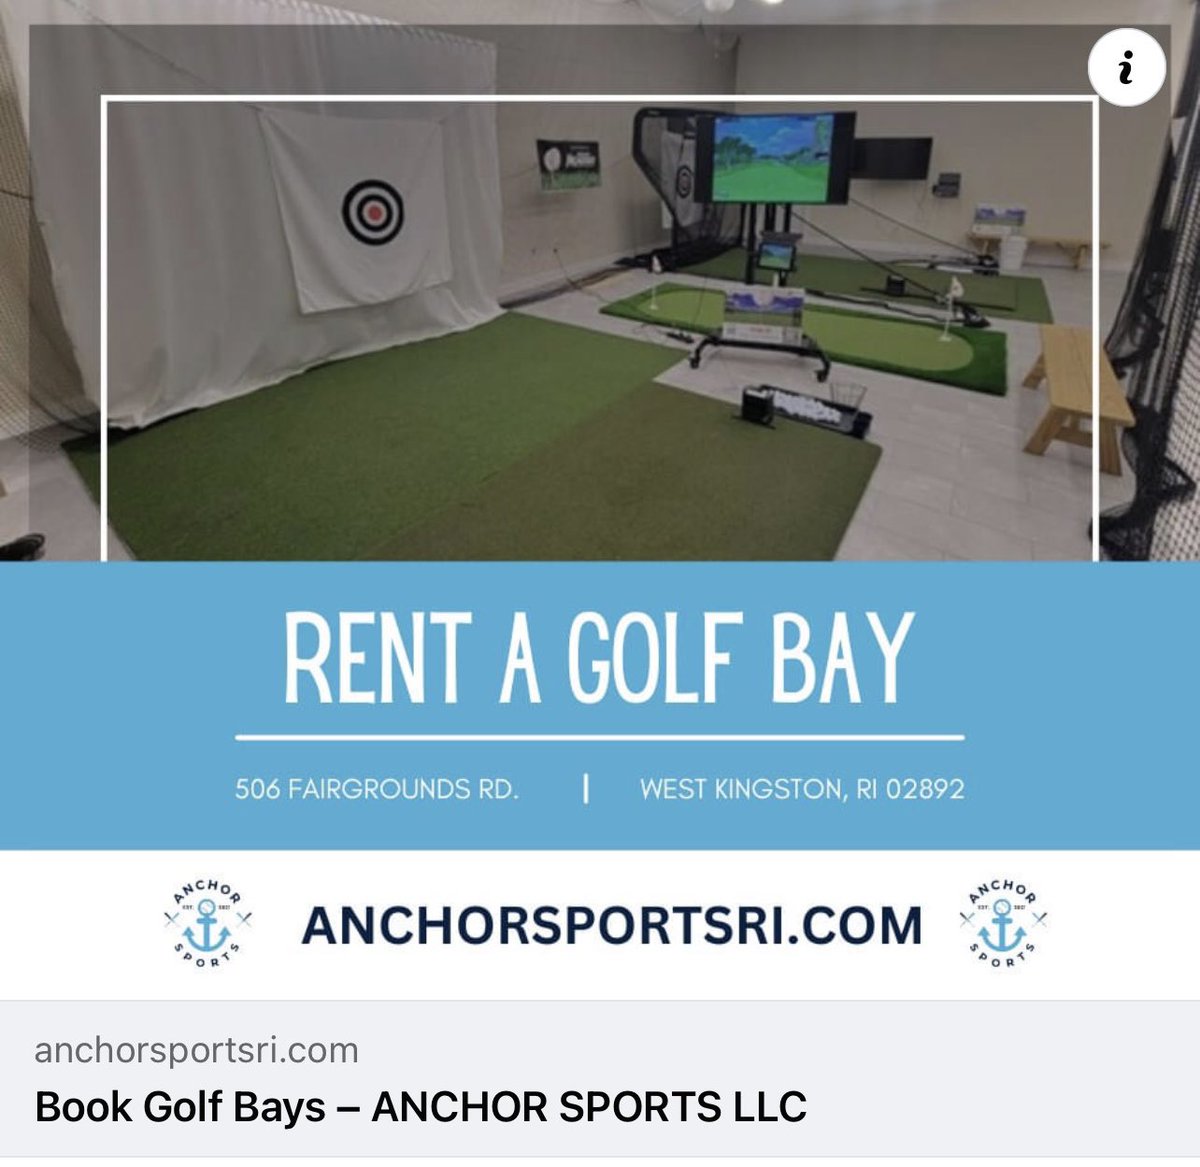 The #golfexperience at #AnchorSports has a new address along with a beautiful new space! Many upgrades to software & computers with super fast wifi to deliver a fantastic golf experience! Select Golf Bay 1 for FULL COURSE E6 PLAY! Or sign up for Golf Lessons #practiceplayimprove